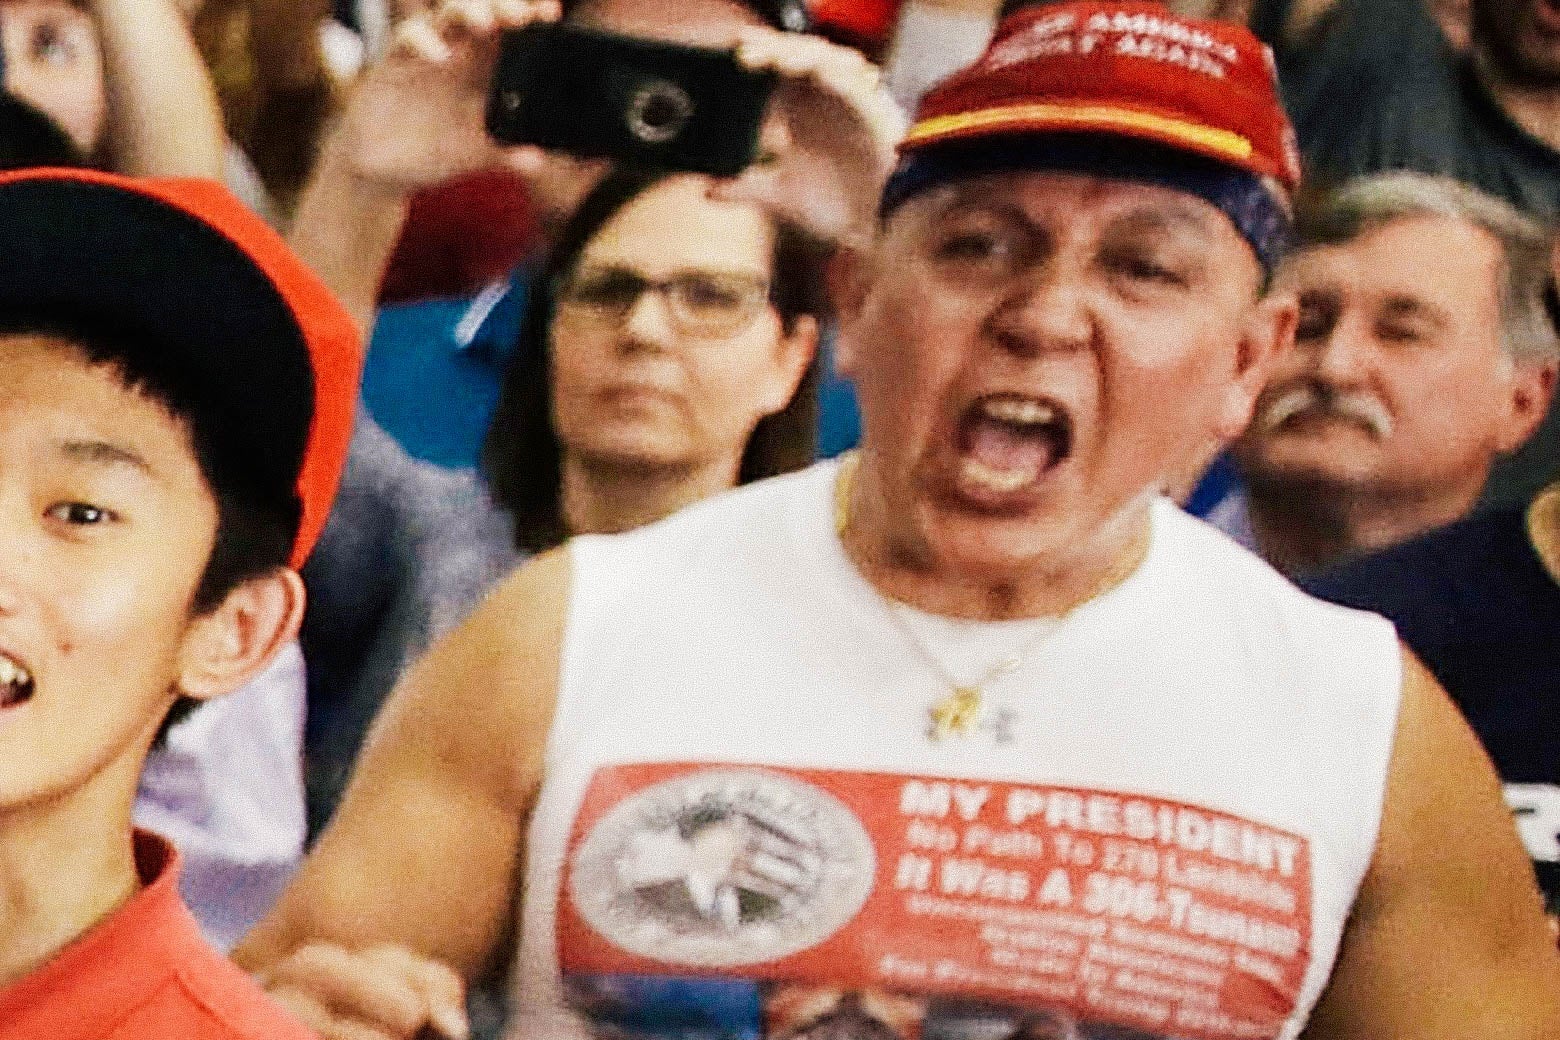 Sayoc wearing a MAGA hat and pro-Trump shirt and yelling in a crowd of other Trump supporters.